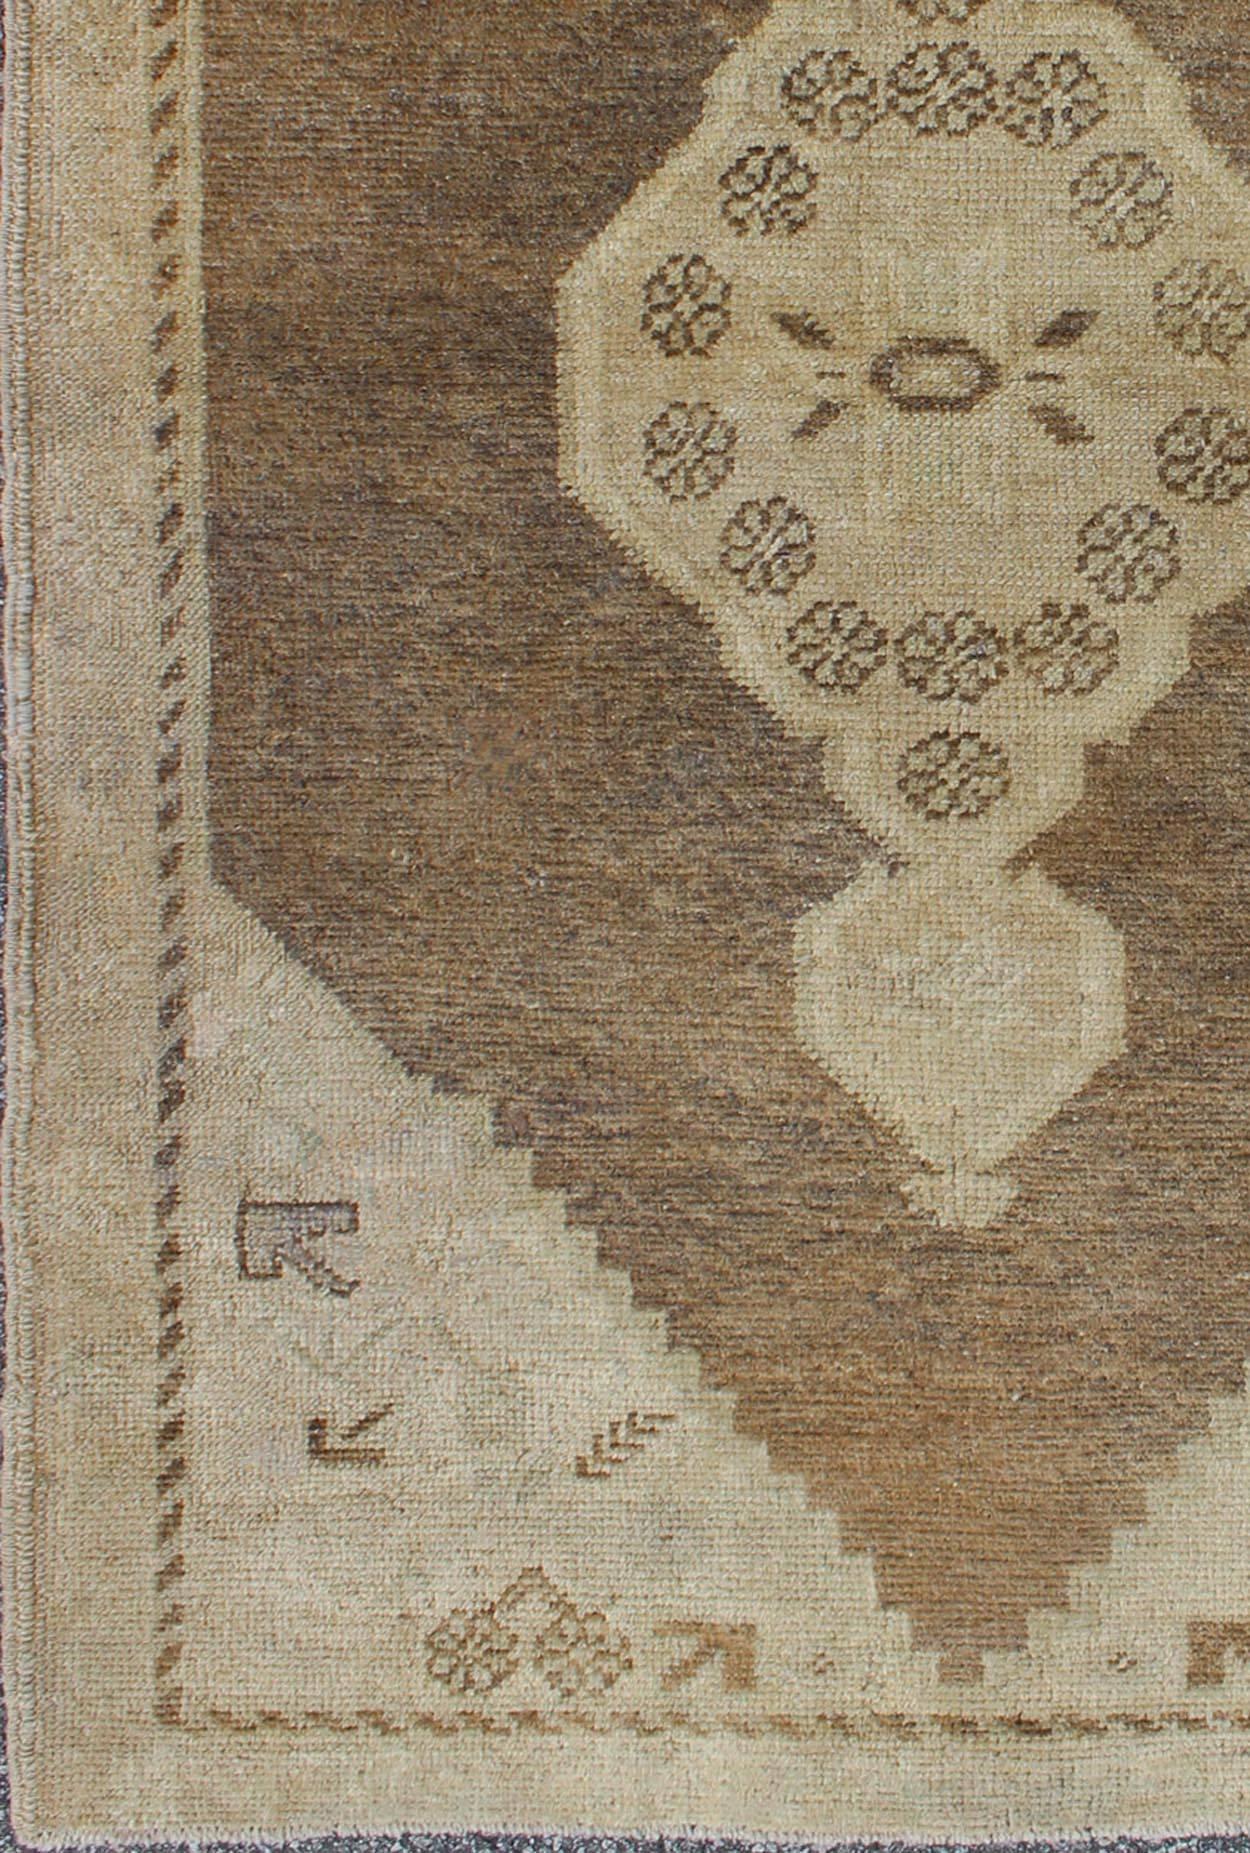 Faded vintage Turkish Oushak rug with layered medallion in creams and grays, rug en-112722, country of origin / type: Turkey / Oushak, circa 1940

This midcentury vintage Turkish Oushak rug features an intricately beautiful design. The simple